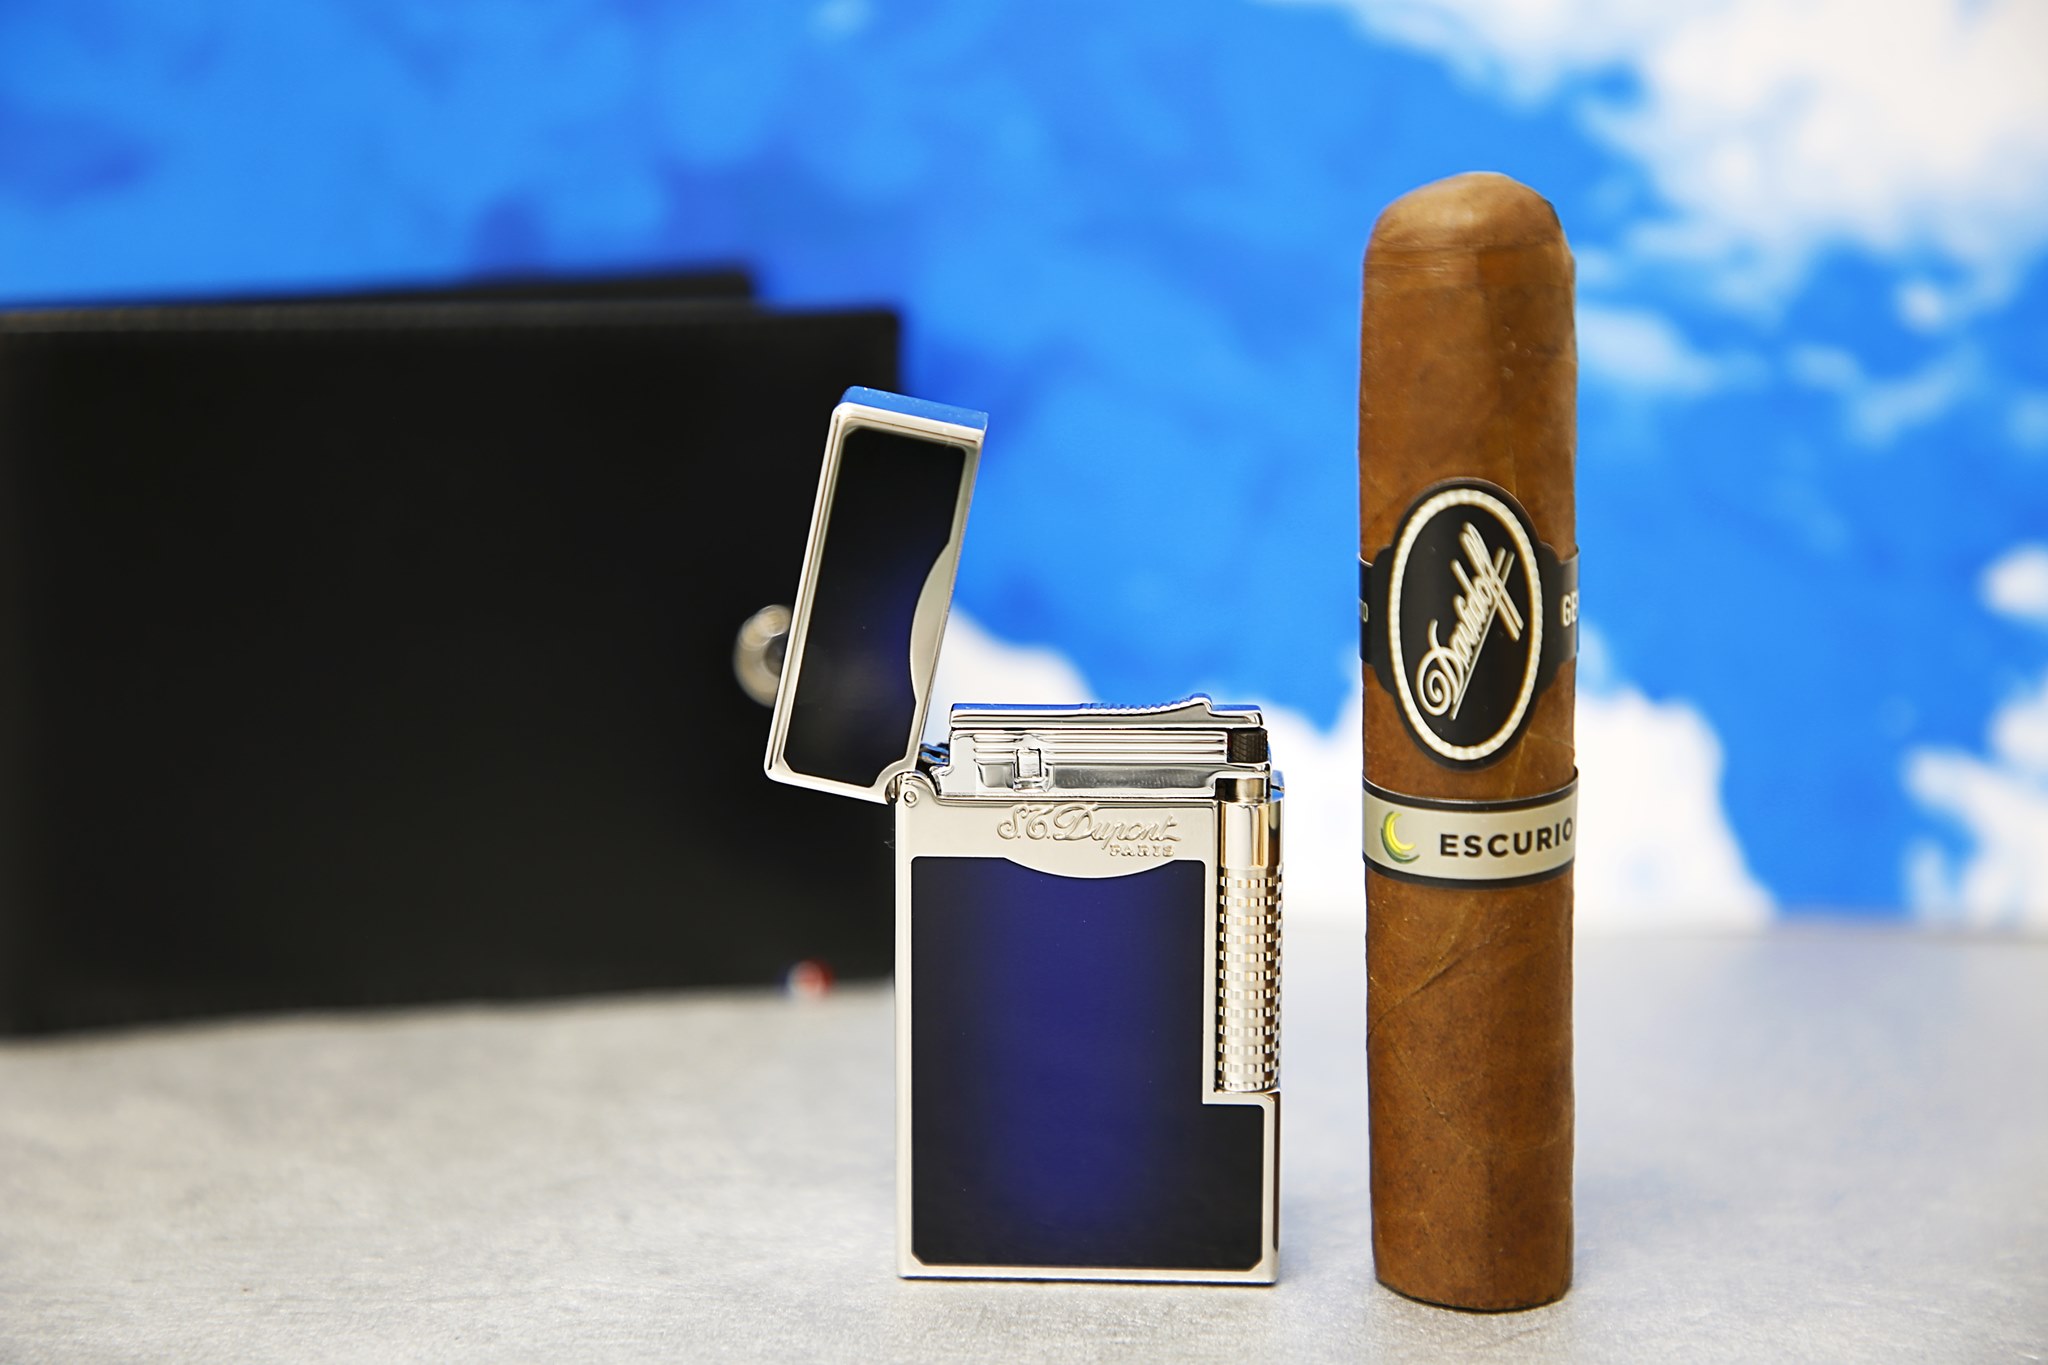 No need to introduce it : with its unique technology allowing you to switch from soft flame to torch flame, "Le Grand Dupont" is the King of lighters :